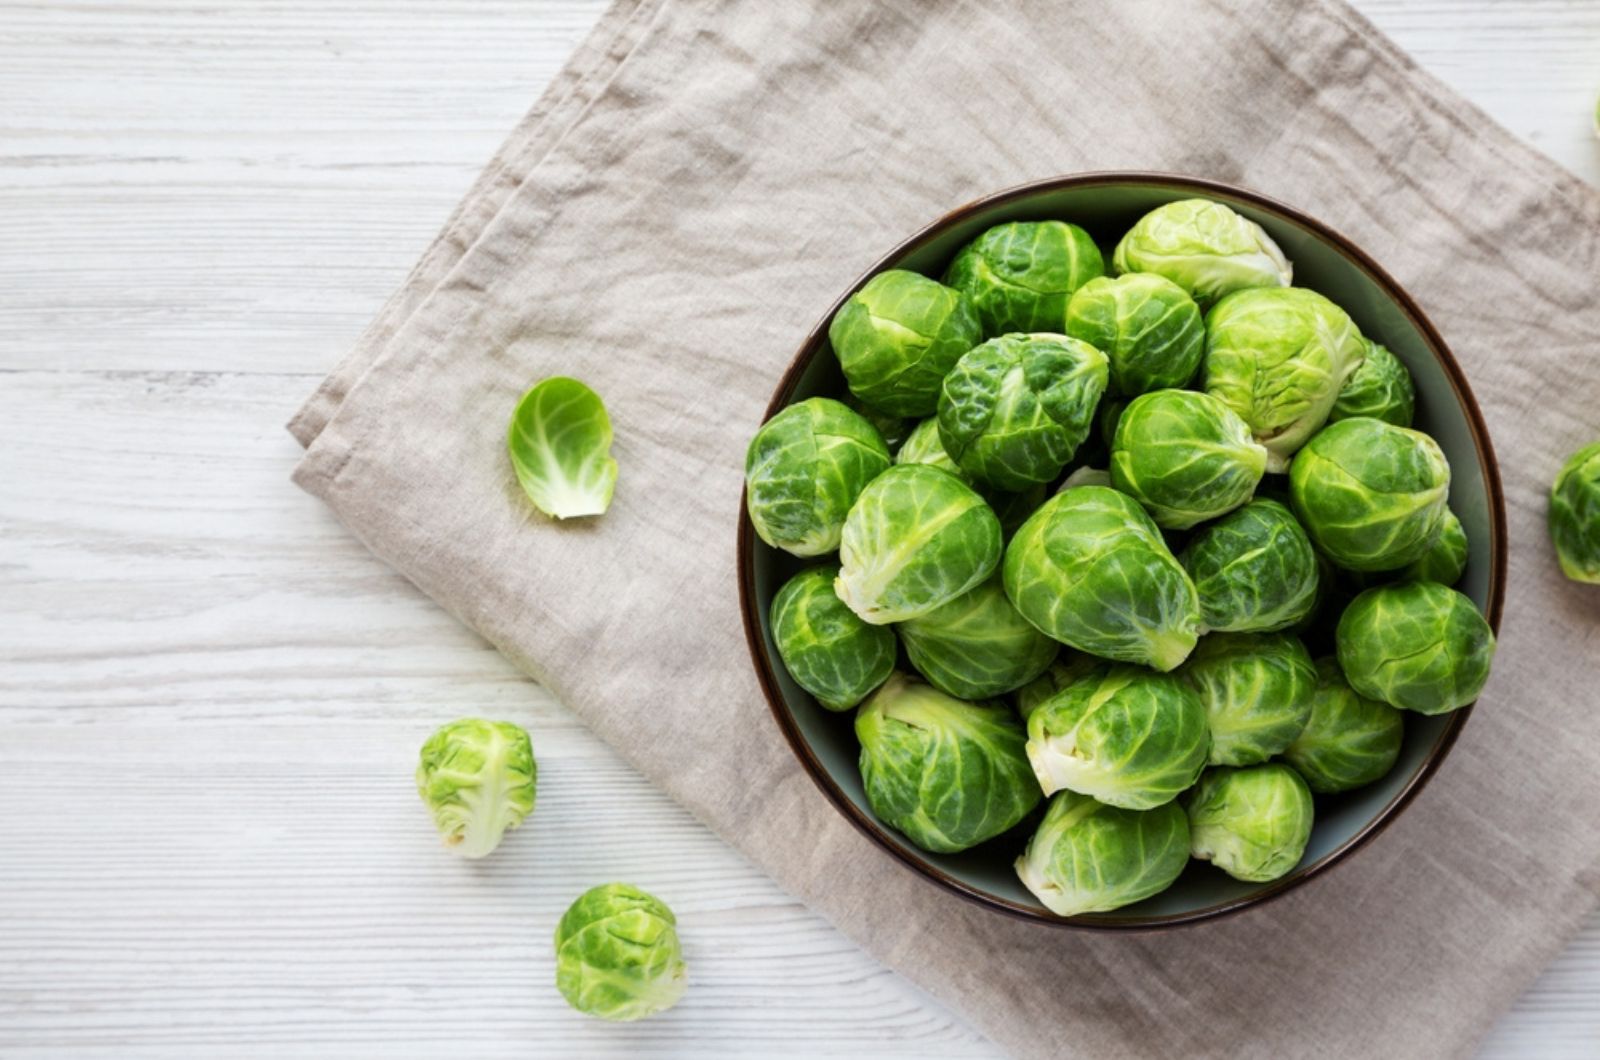 Brussels Sprouts on kitchen cloth